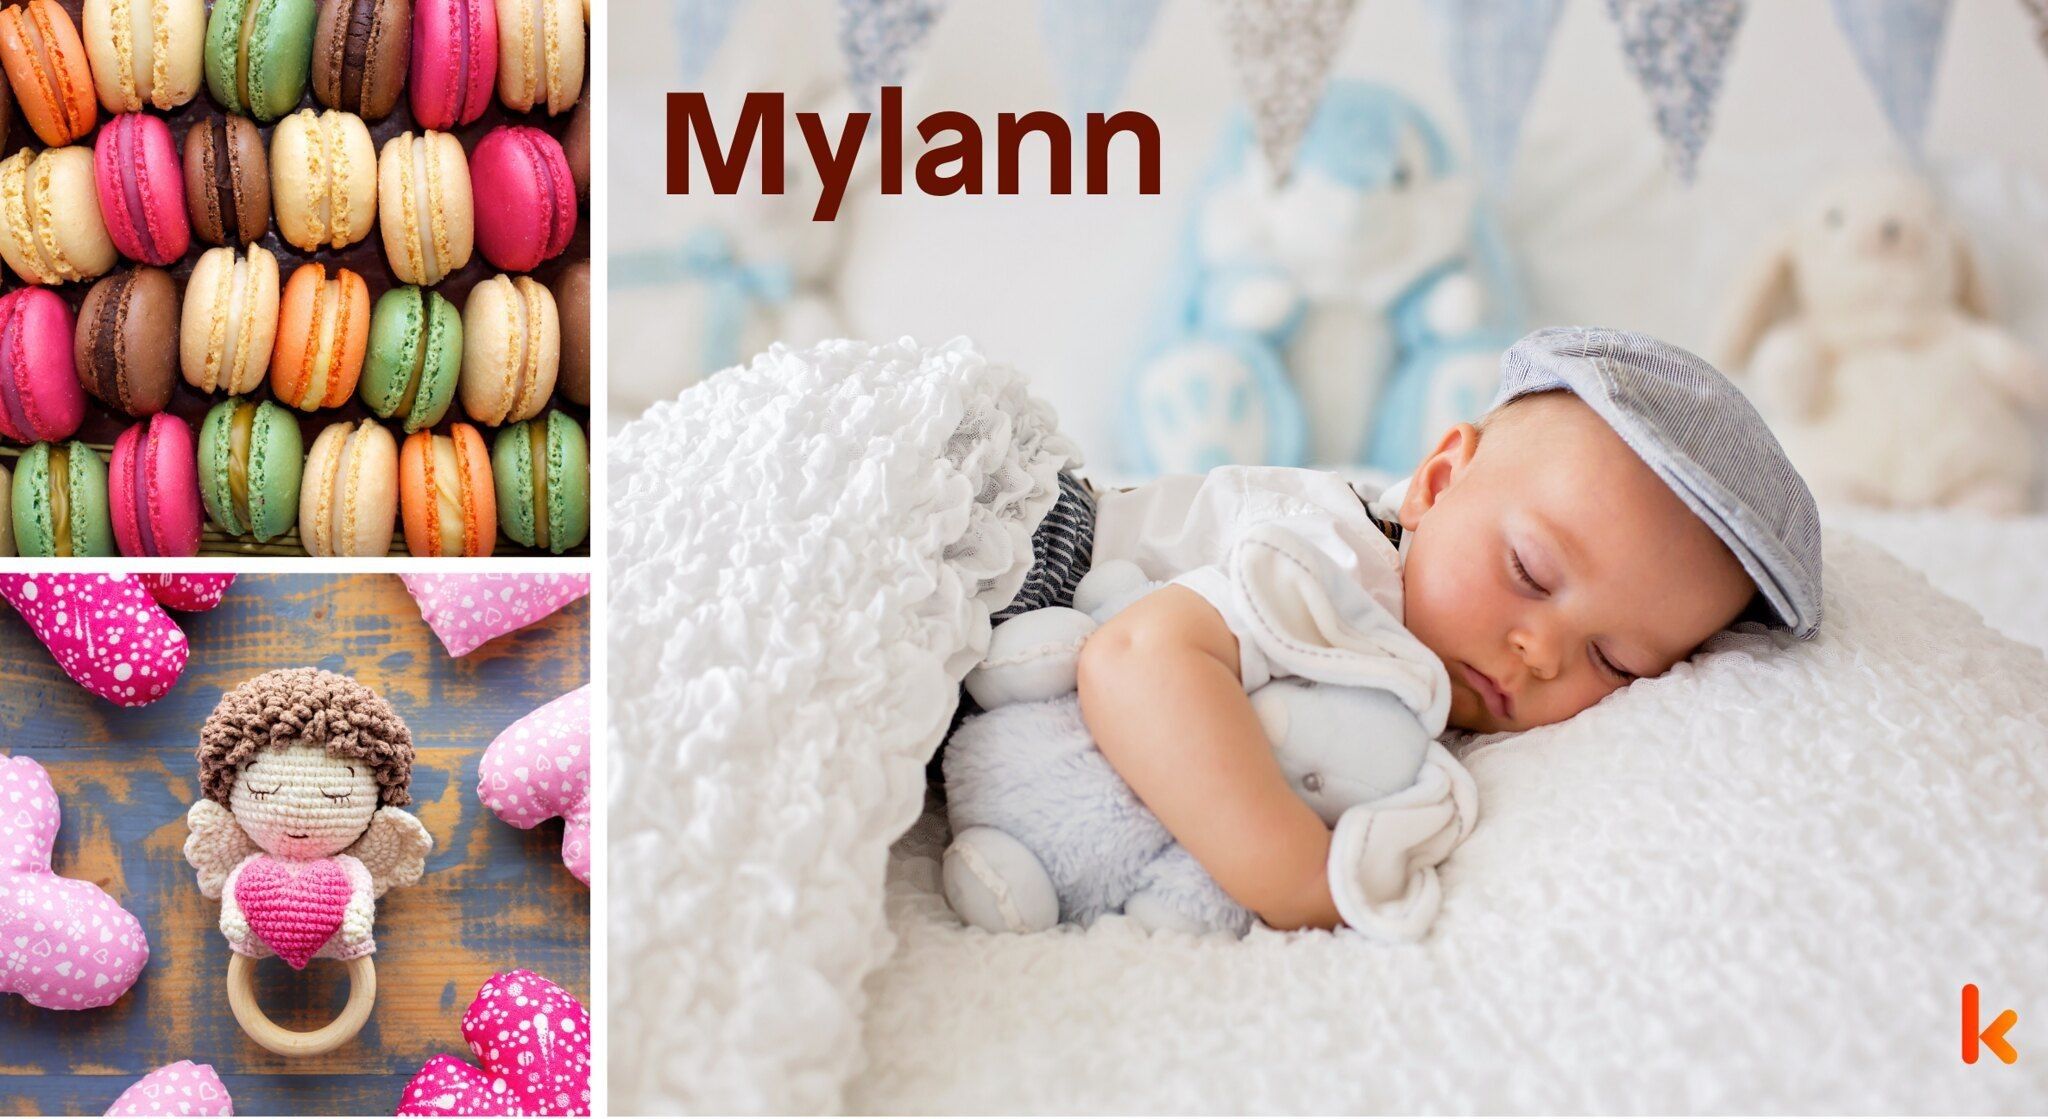 Meaning of the name Mylann